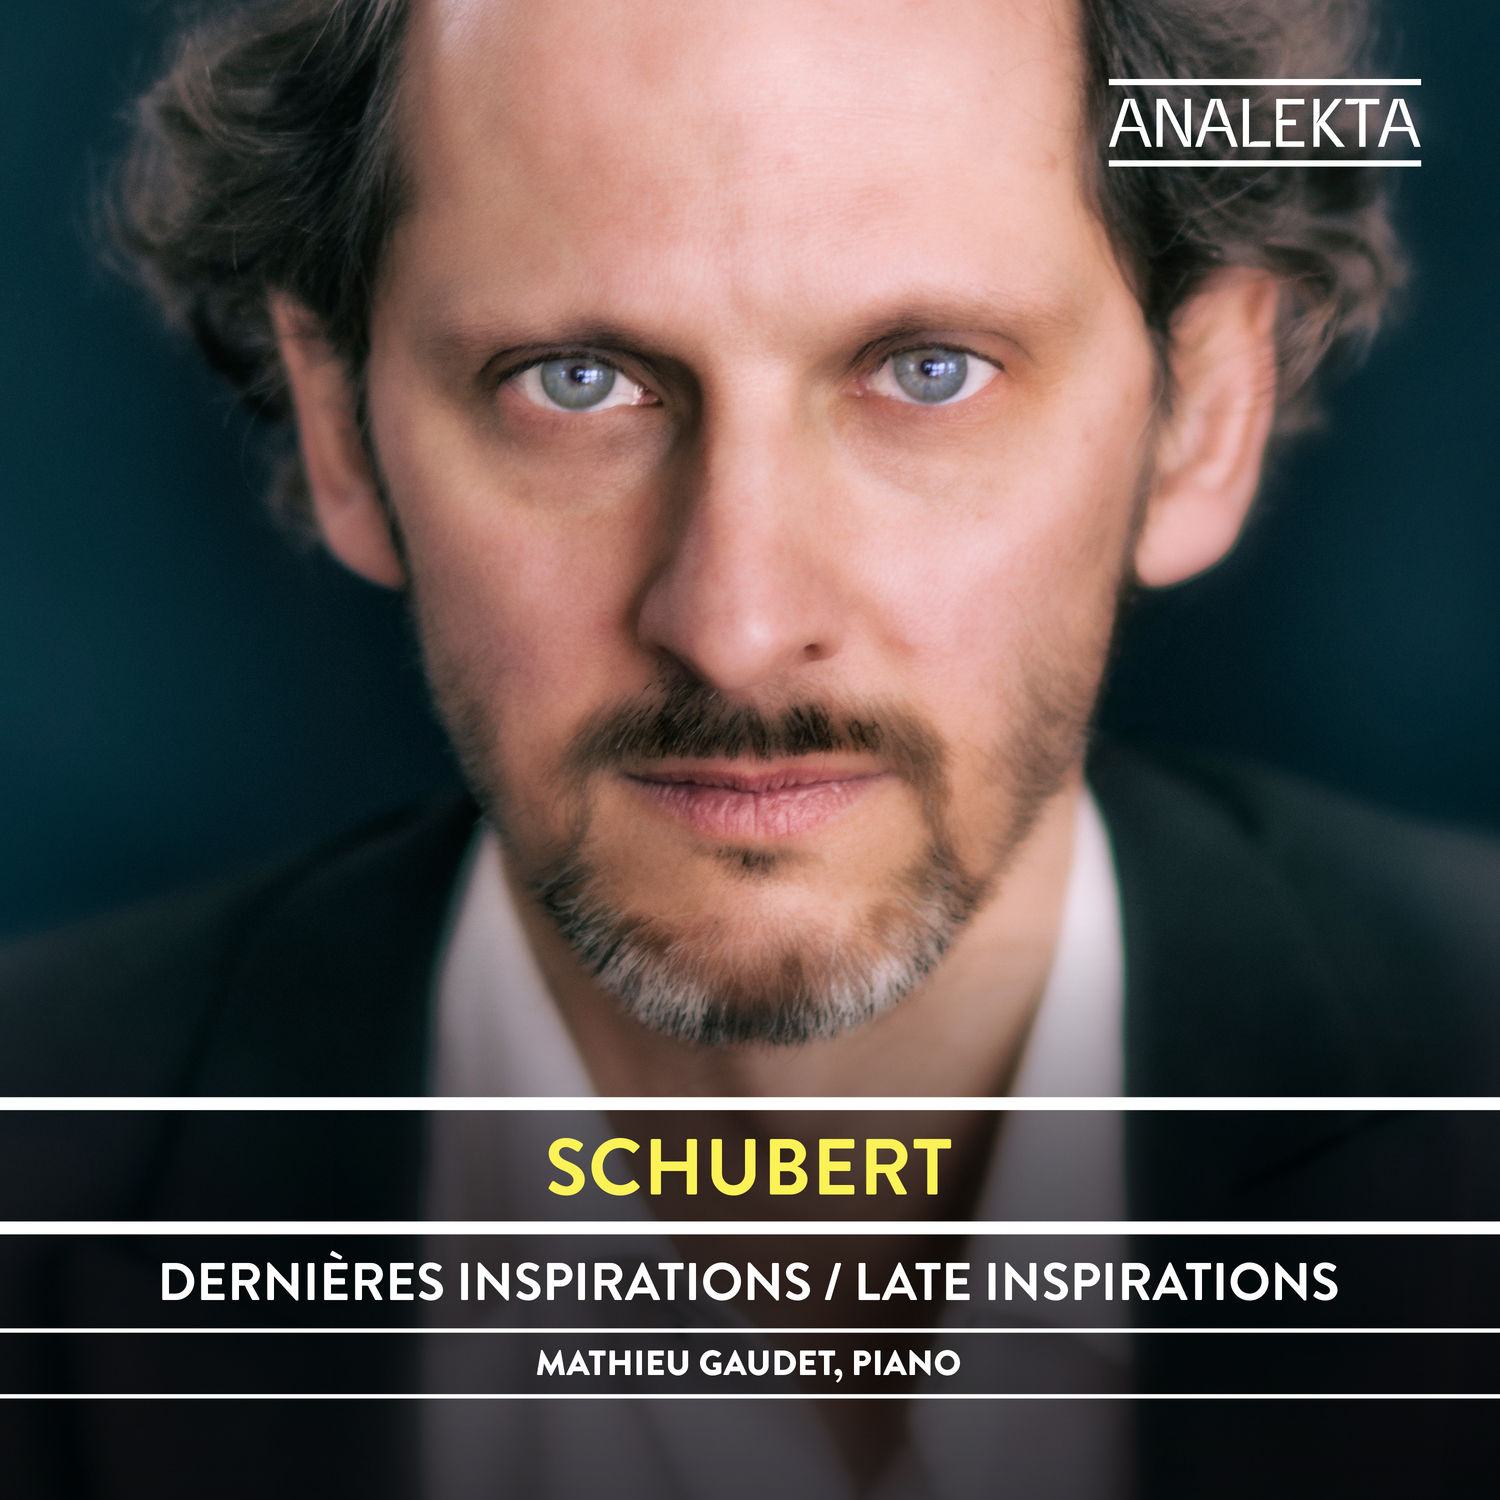 Mathieu Gaudet - Schubert: The Complete Sonatas and Major Piano Works, Volume 2 - Late Inspirations (2020) [FLAC 24bit/96kHz]